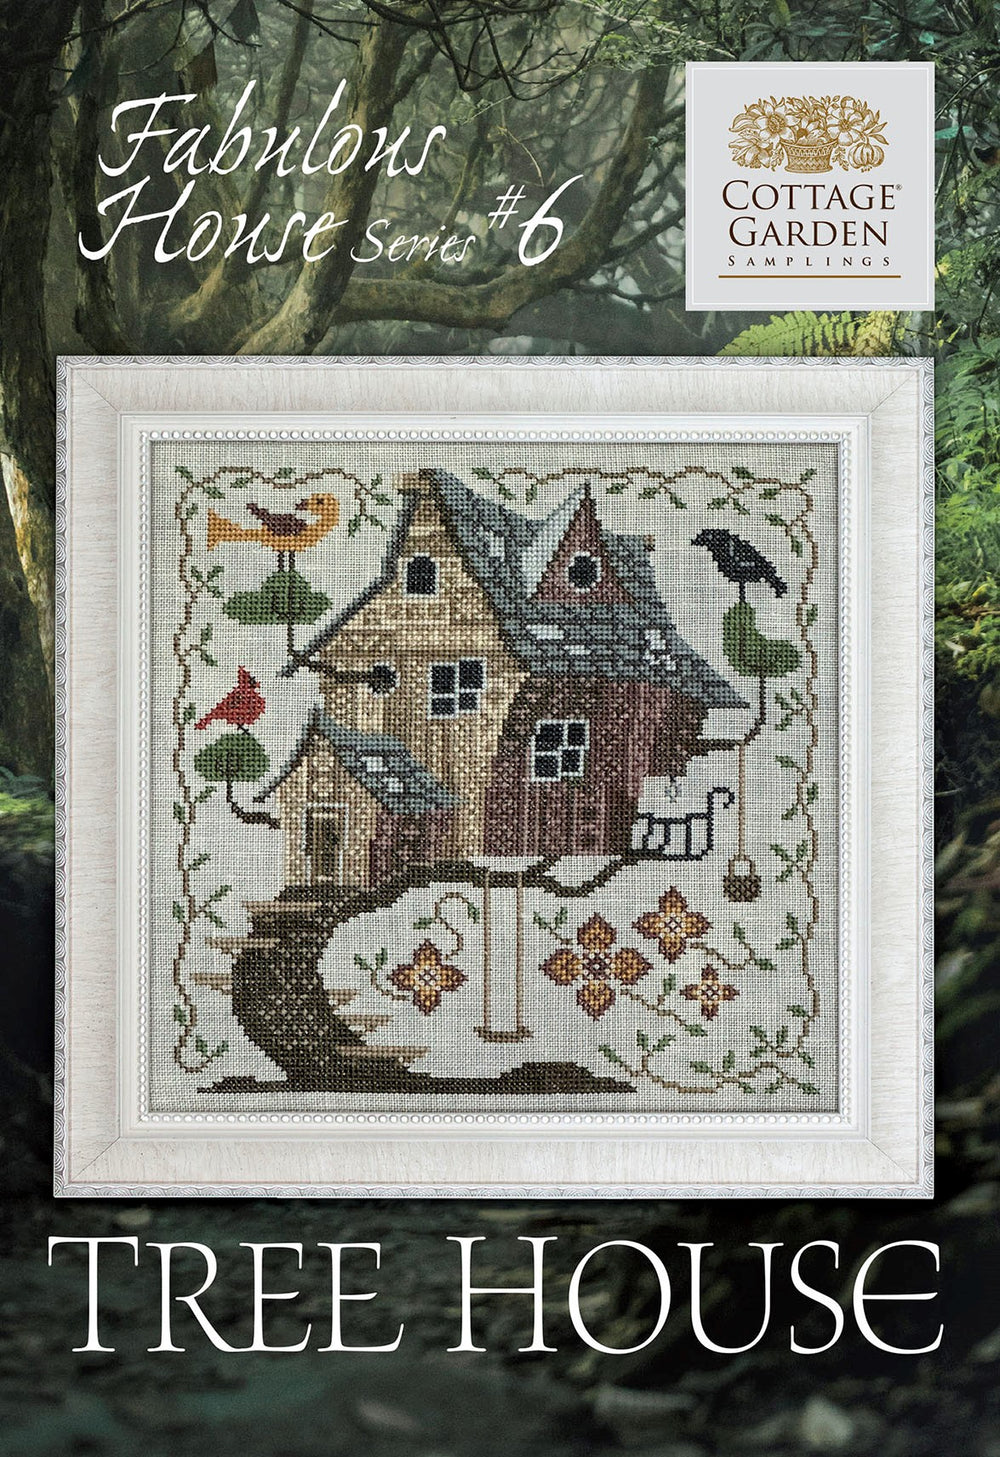 Tree House -  Fabulous House Series #6 by Cottage Garden Samplings